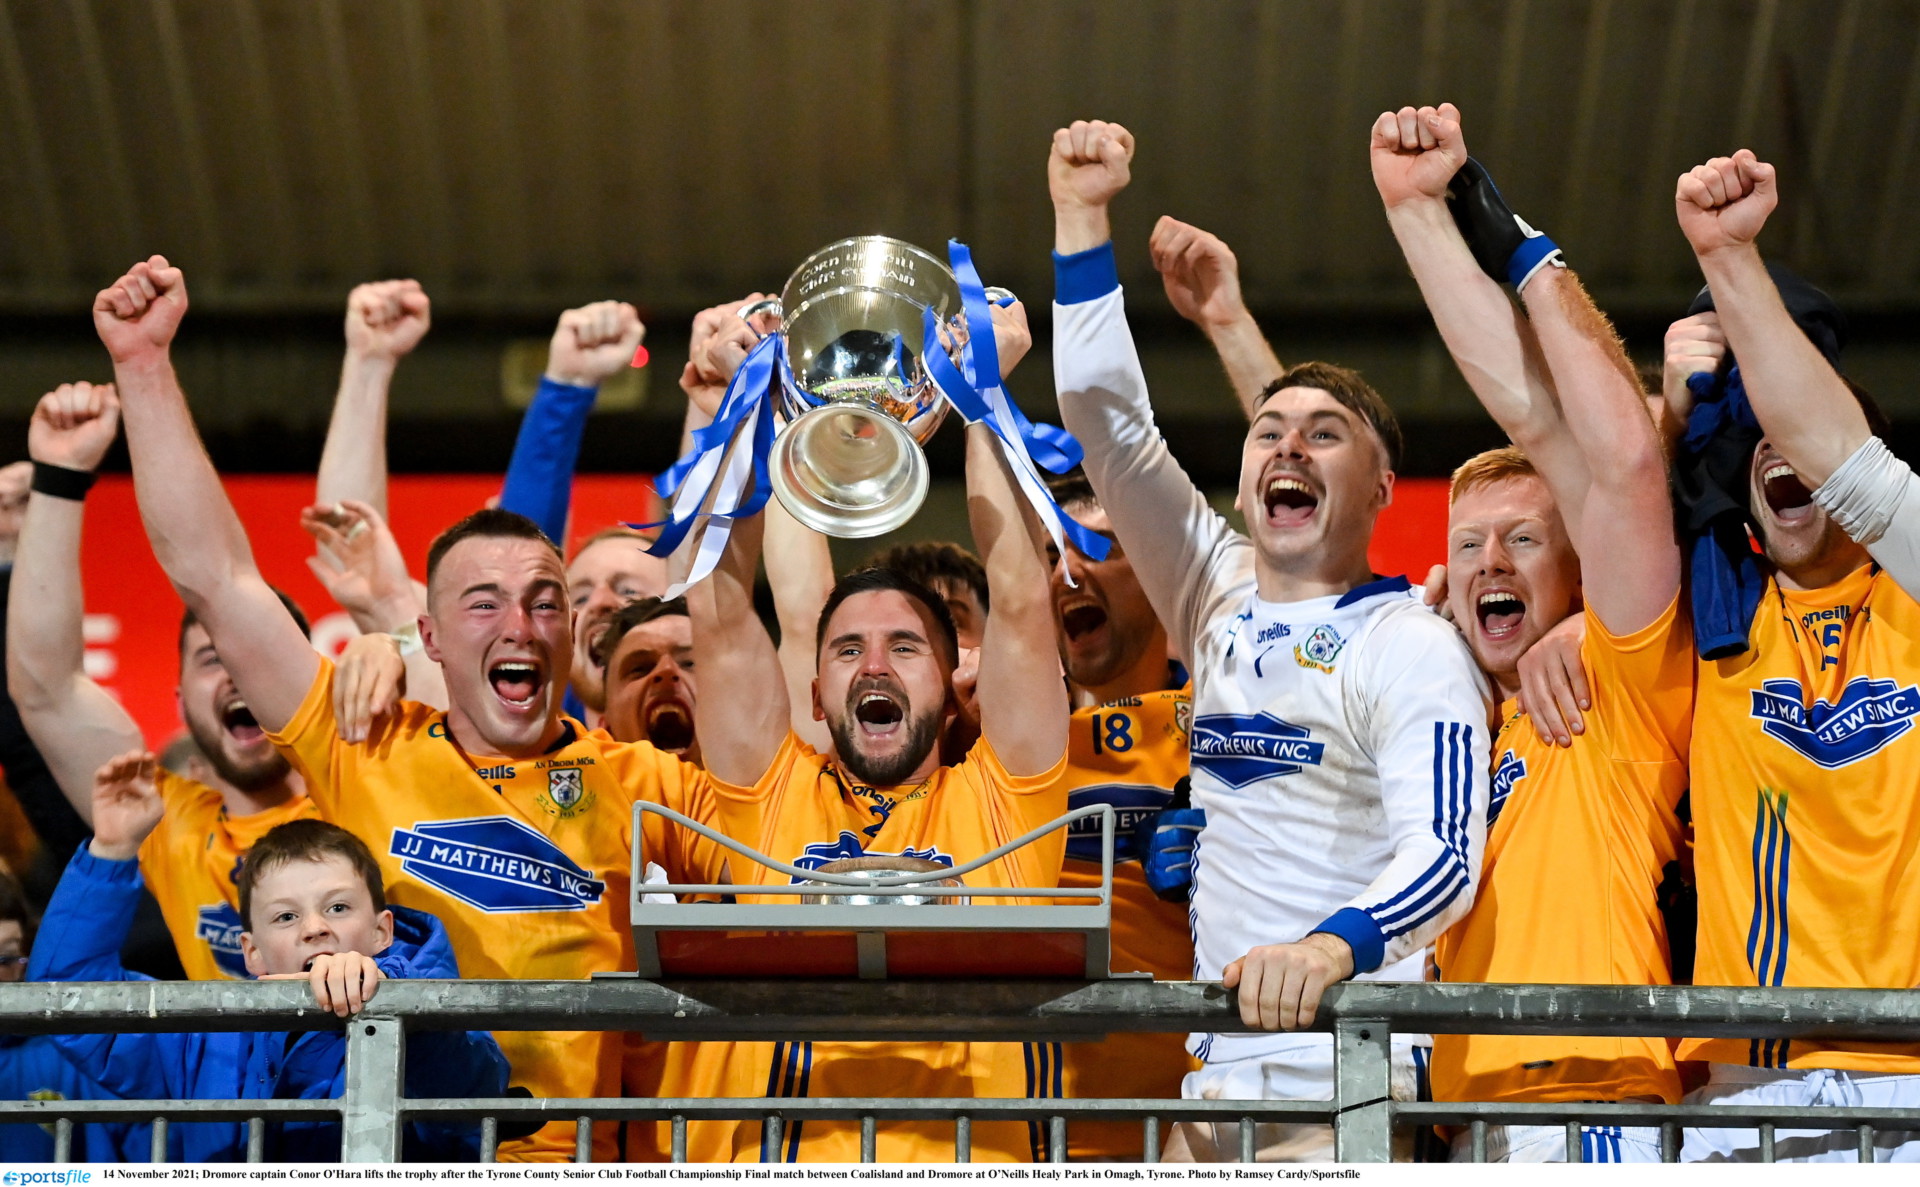 Dromore’s delight as they clinch fourth title